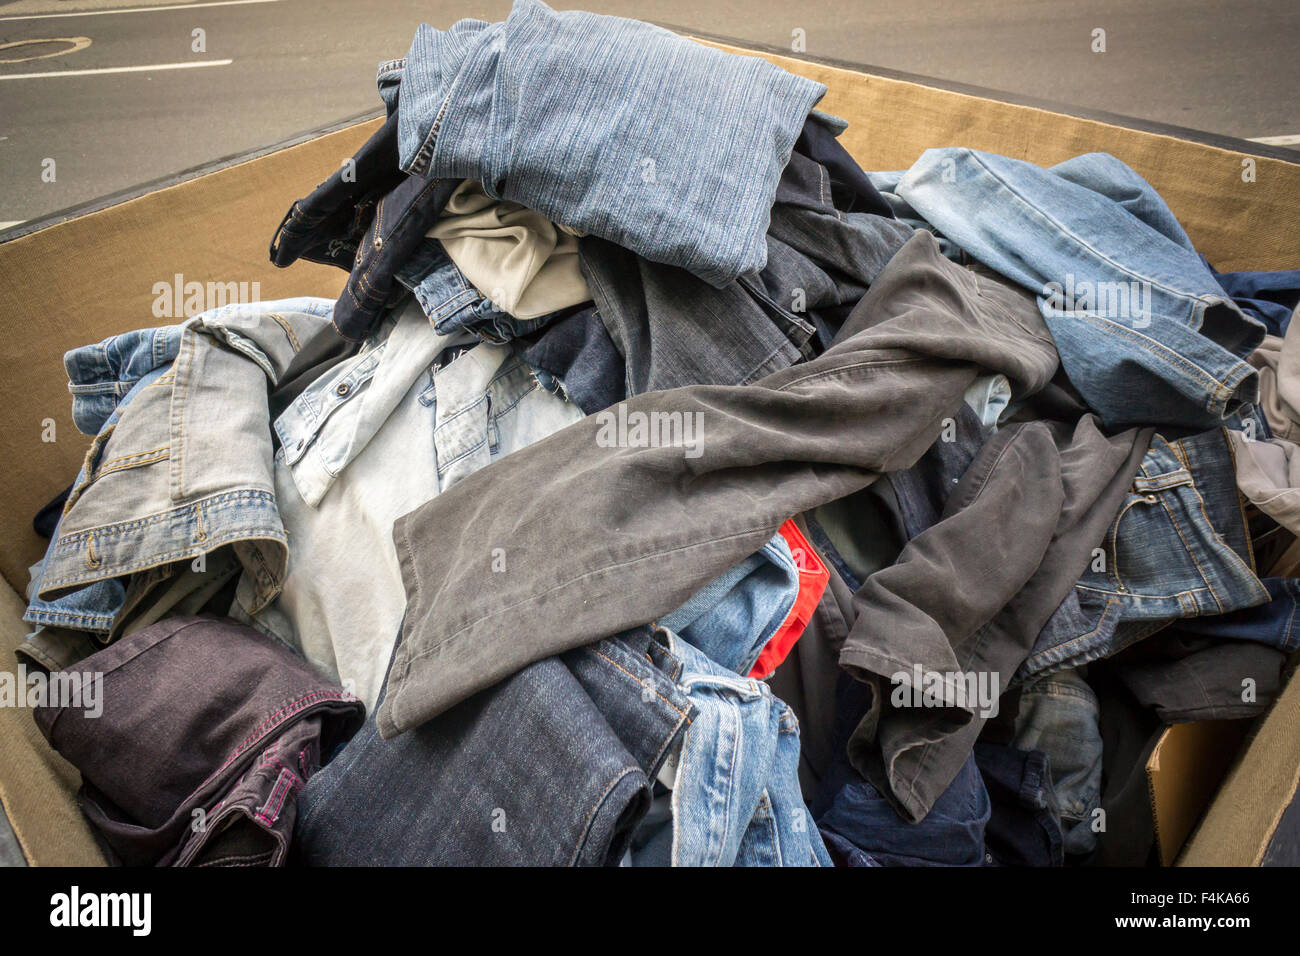 madewell jeans donation